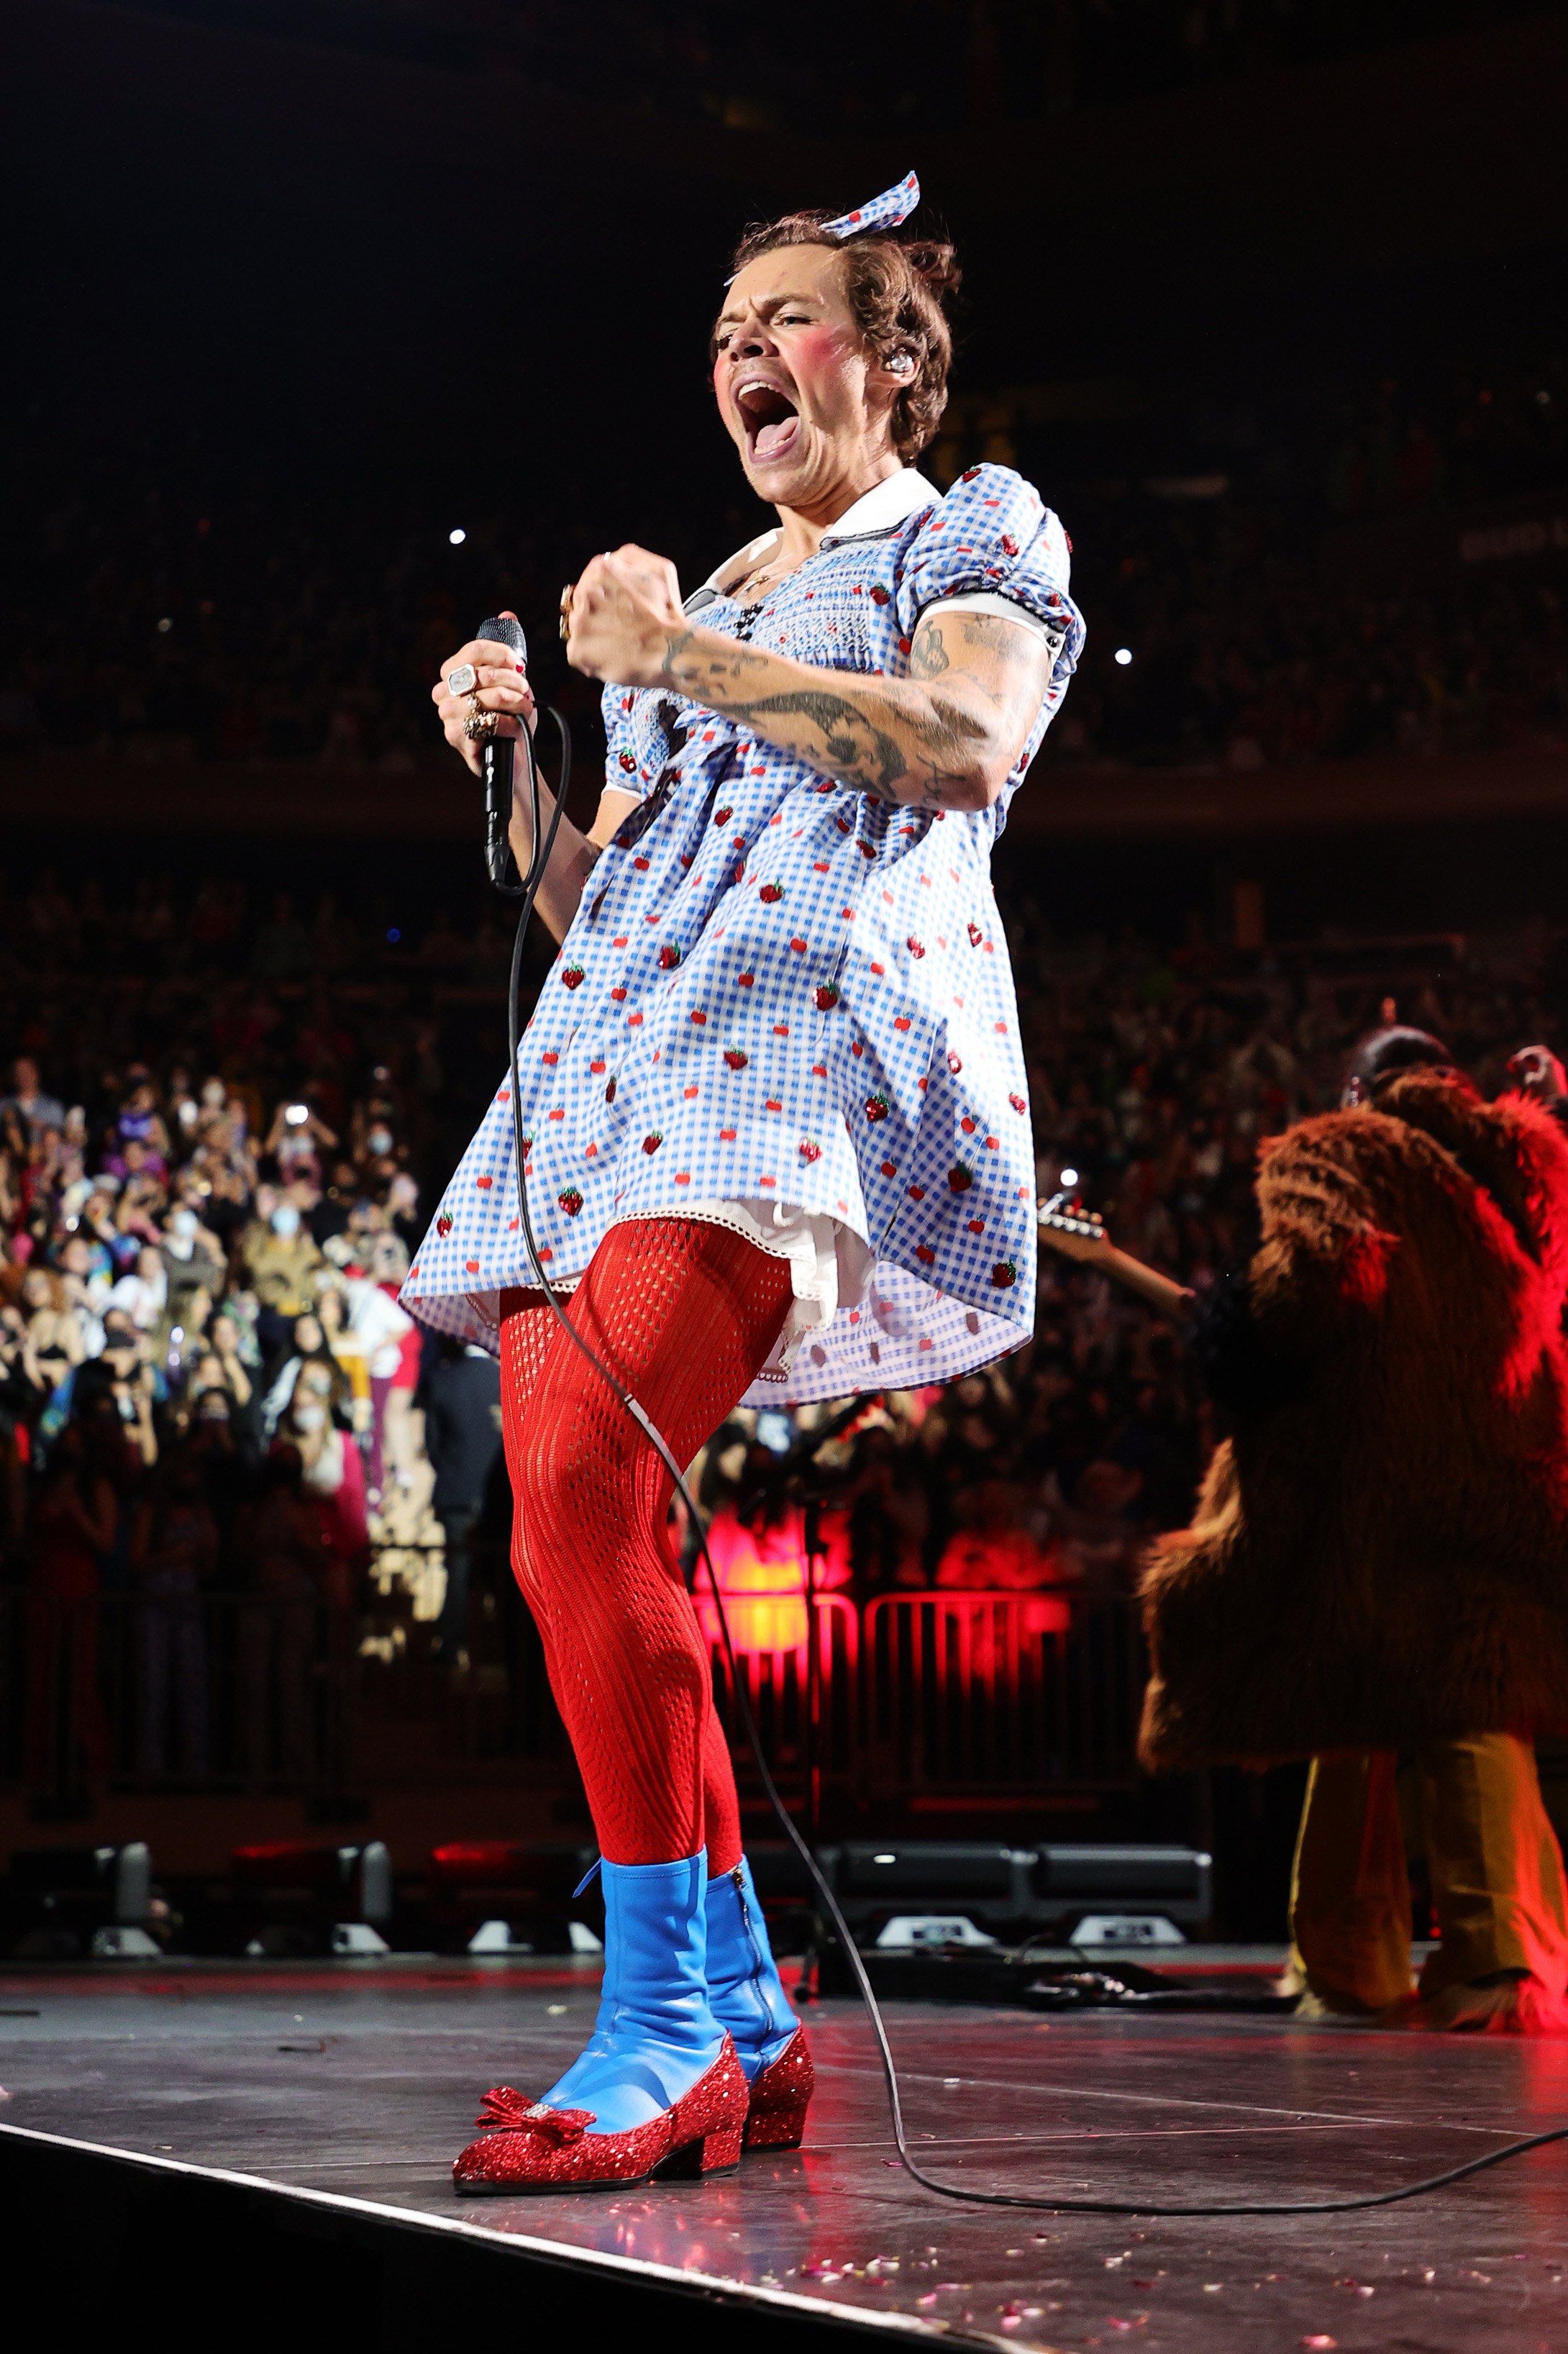 Harry Styles performs onstage at Harry Styles "Harryween" Fancy Dress Party at Madison Square Garden